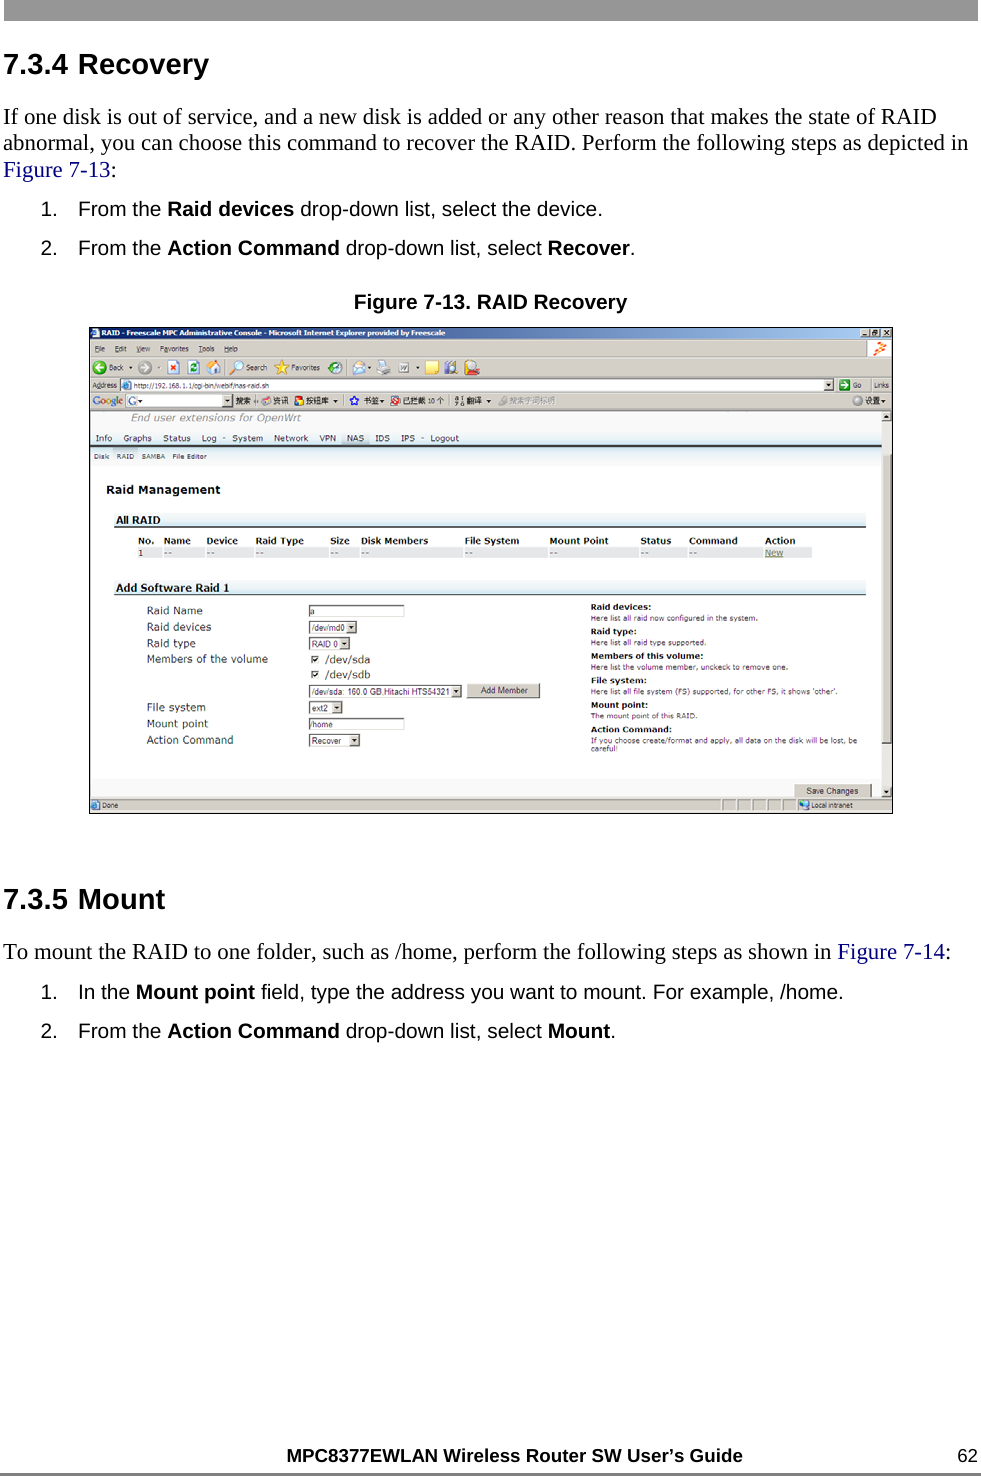                                                          MPC8377EWLAN Wireless Router SW User’s Guide    62 7.3.4 Recovery If one disk is out of service, and a new disk is added or any other reason that makes the state of RAID abnormal, you can choose this command to recover the RAID. Perform the following steps as depicted in Figure 7-13: 1. From the Raid devices drop-down list, select the device. 2. From the Action Command drop-down list, select Recover. Figure 7-13. RAID Recovery  7.3.5 Mount To mount the RAID to one folder, such as /home, perform the following steps as shown in Figure 7-14: 1. In the Mount point field, type the address you want to mount. For example, /home. 2. From the Action Command drop-down list, select Mount. 